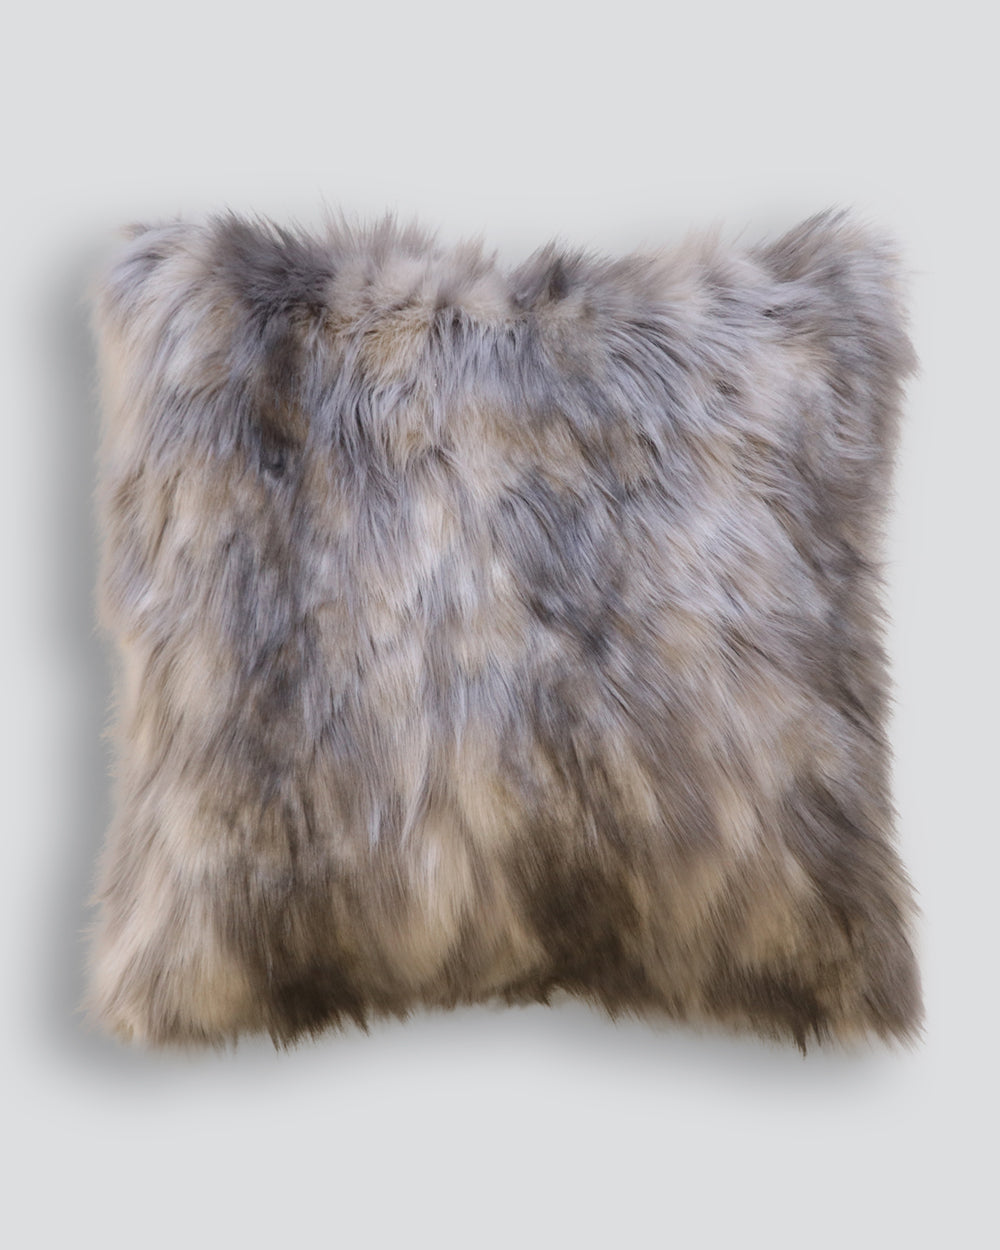 Heirloom Mountain Hare Cushions in Faux Fur are available from Make Your House A Home Premium Stockist. Furniture Store Bendigo, Victoria. Australia Wide Delivery. Furtex Baya.